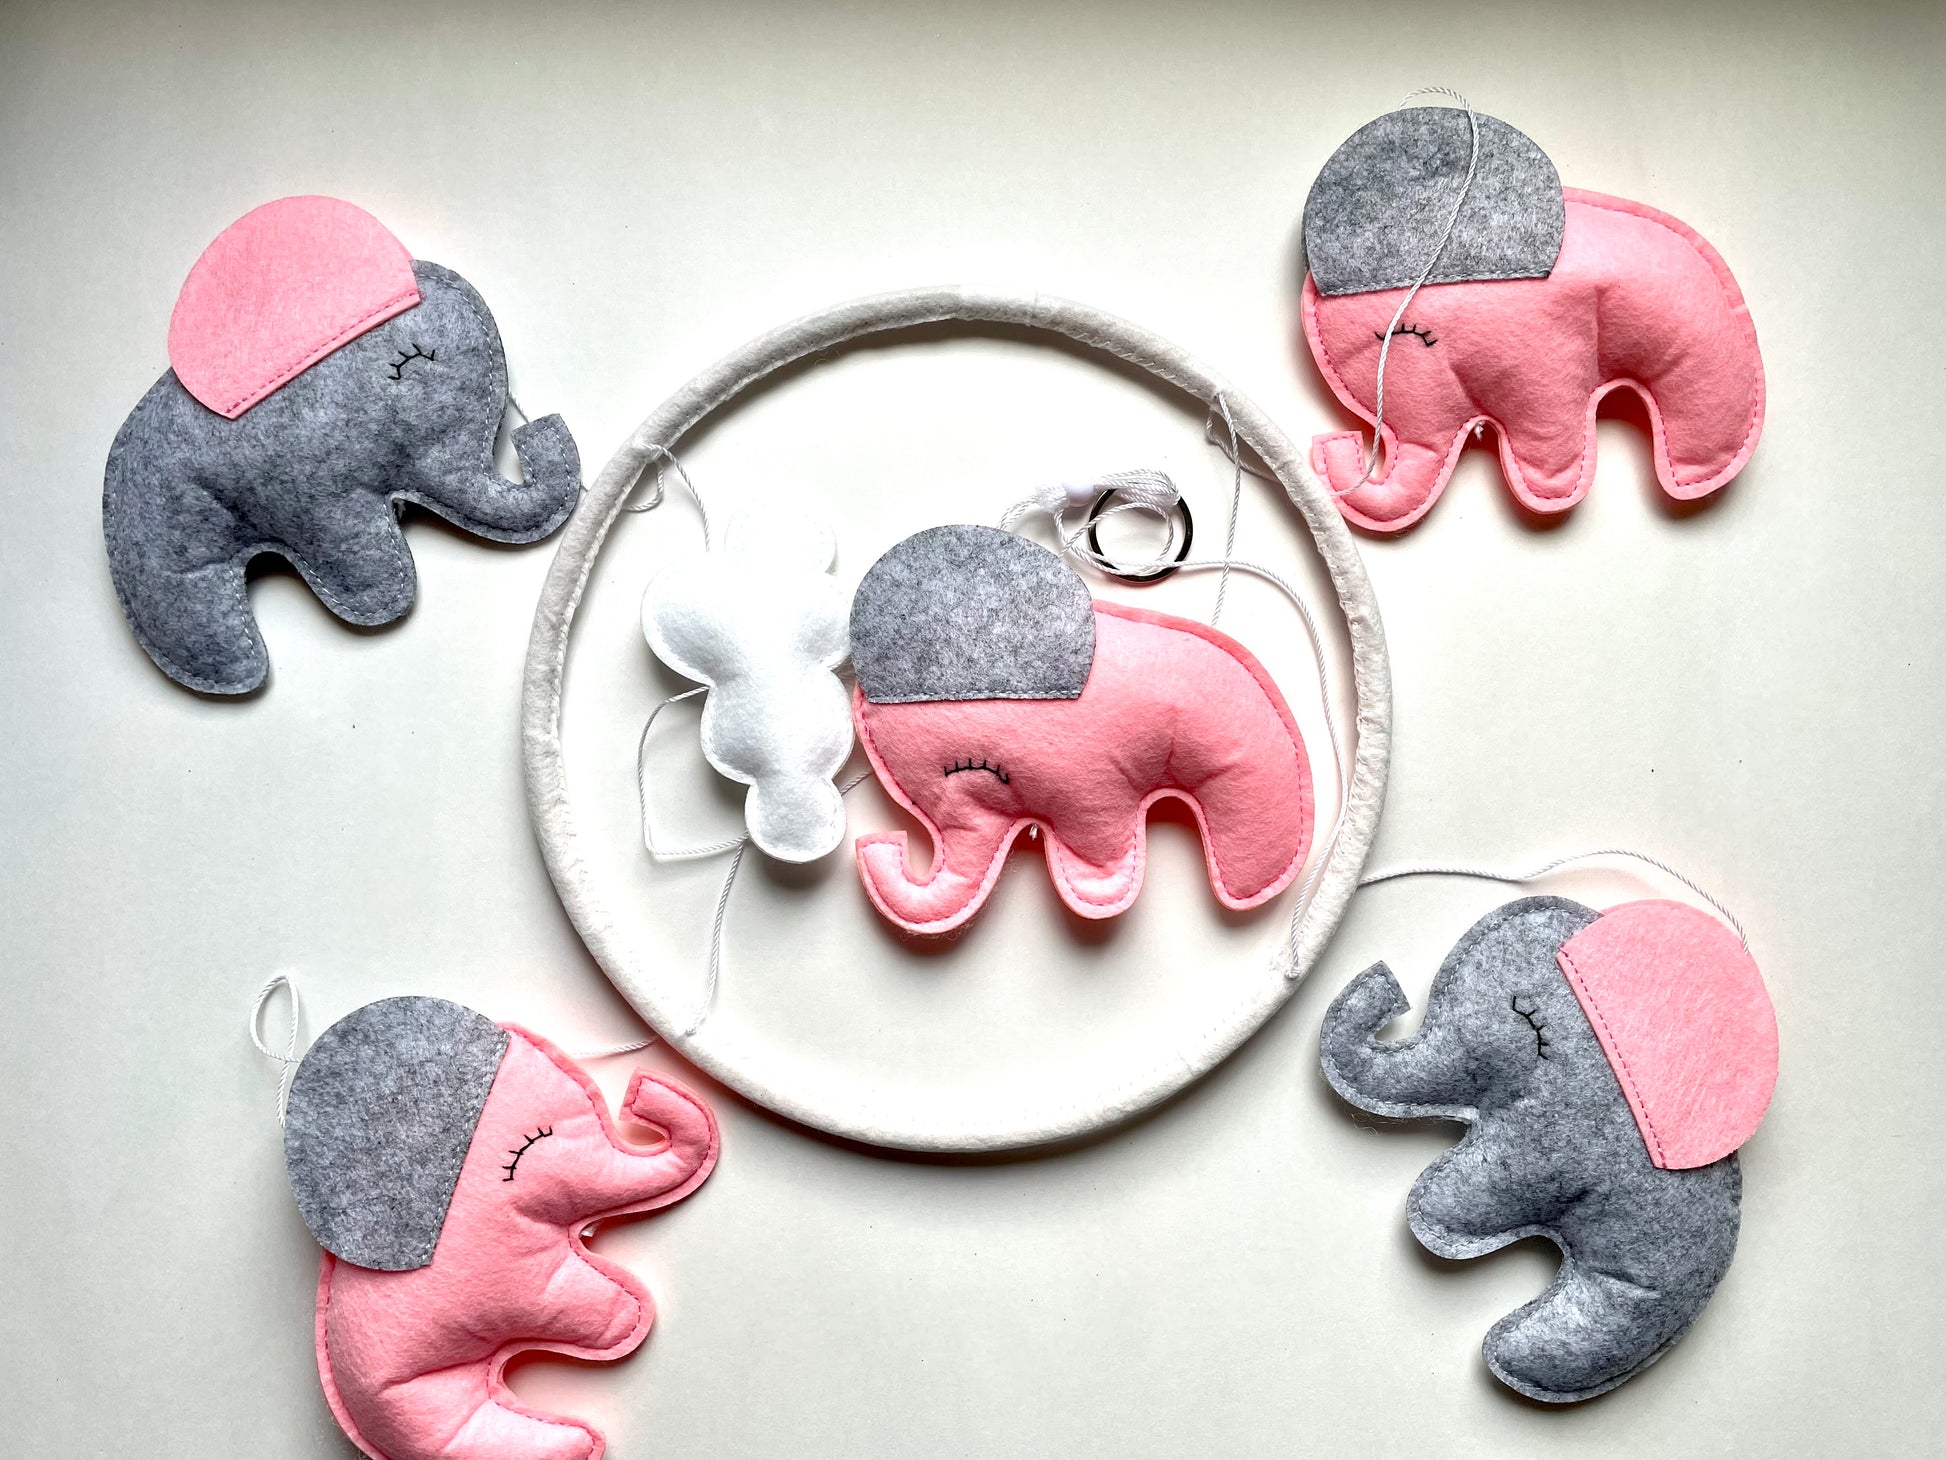 ELEPHANT CRIB NURSERY MOBILE FOR TODDLERS